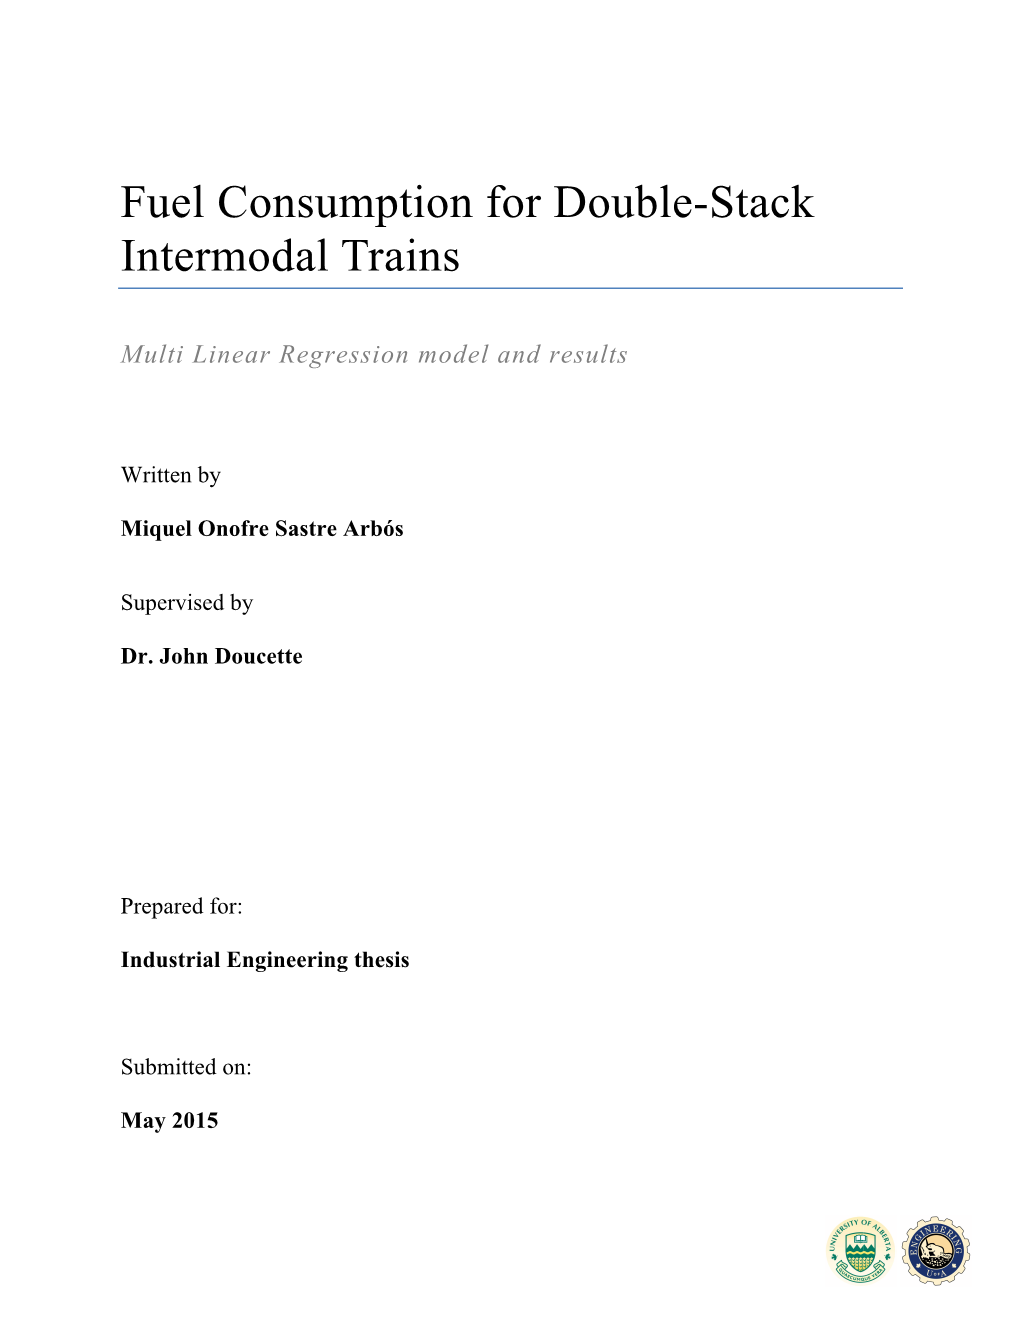 Fuel Consumption for Double-Stack Intermodal Trains